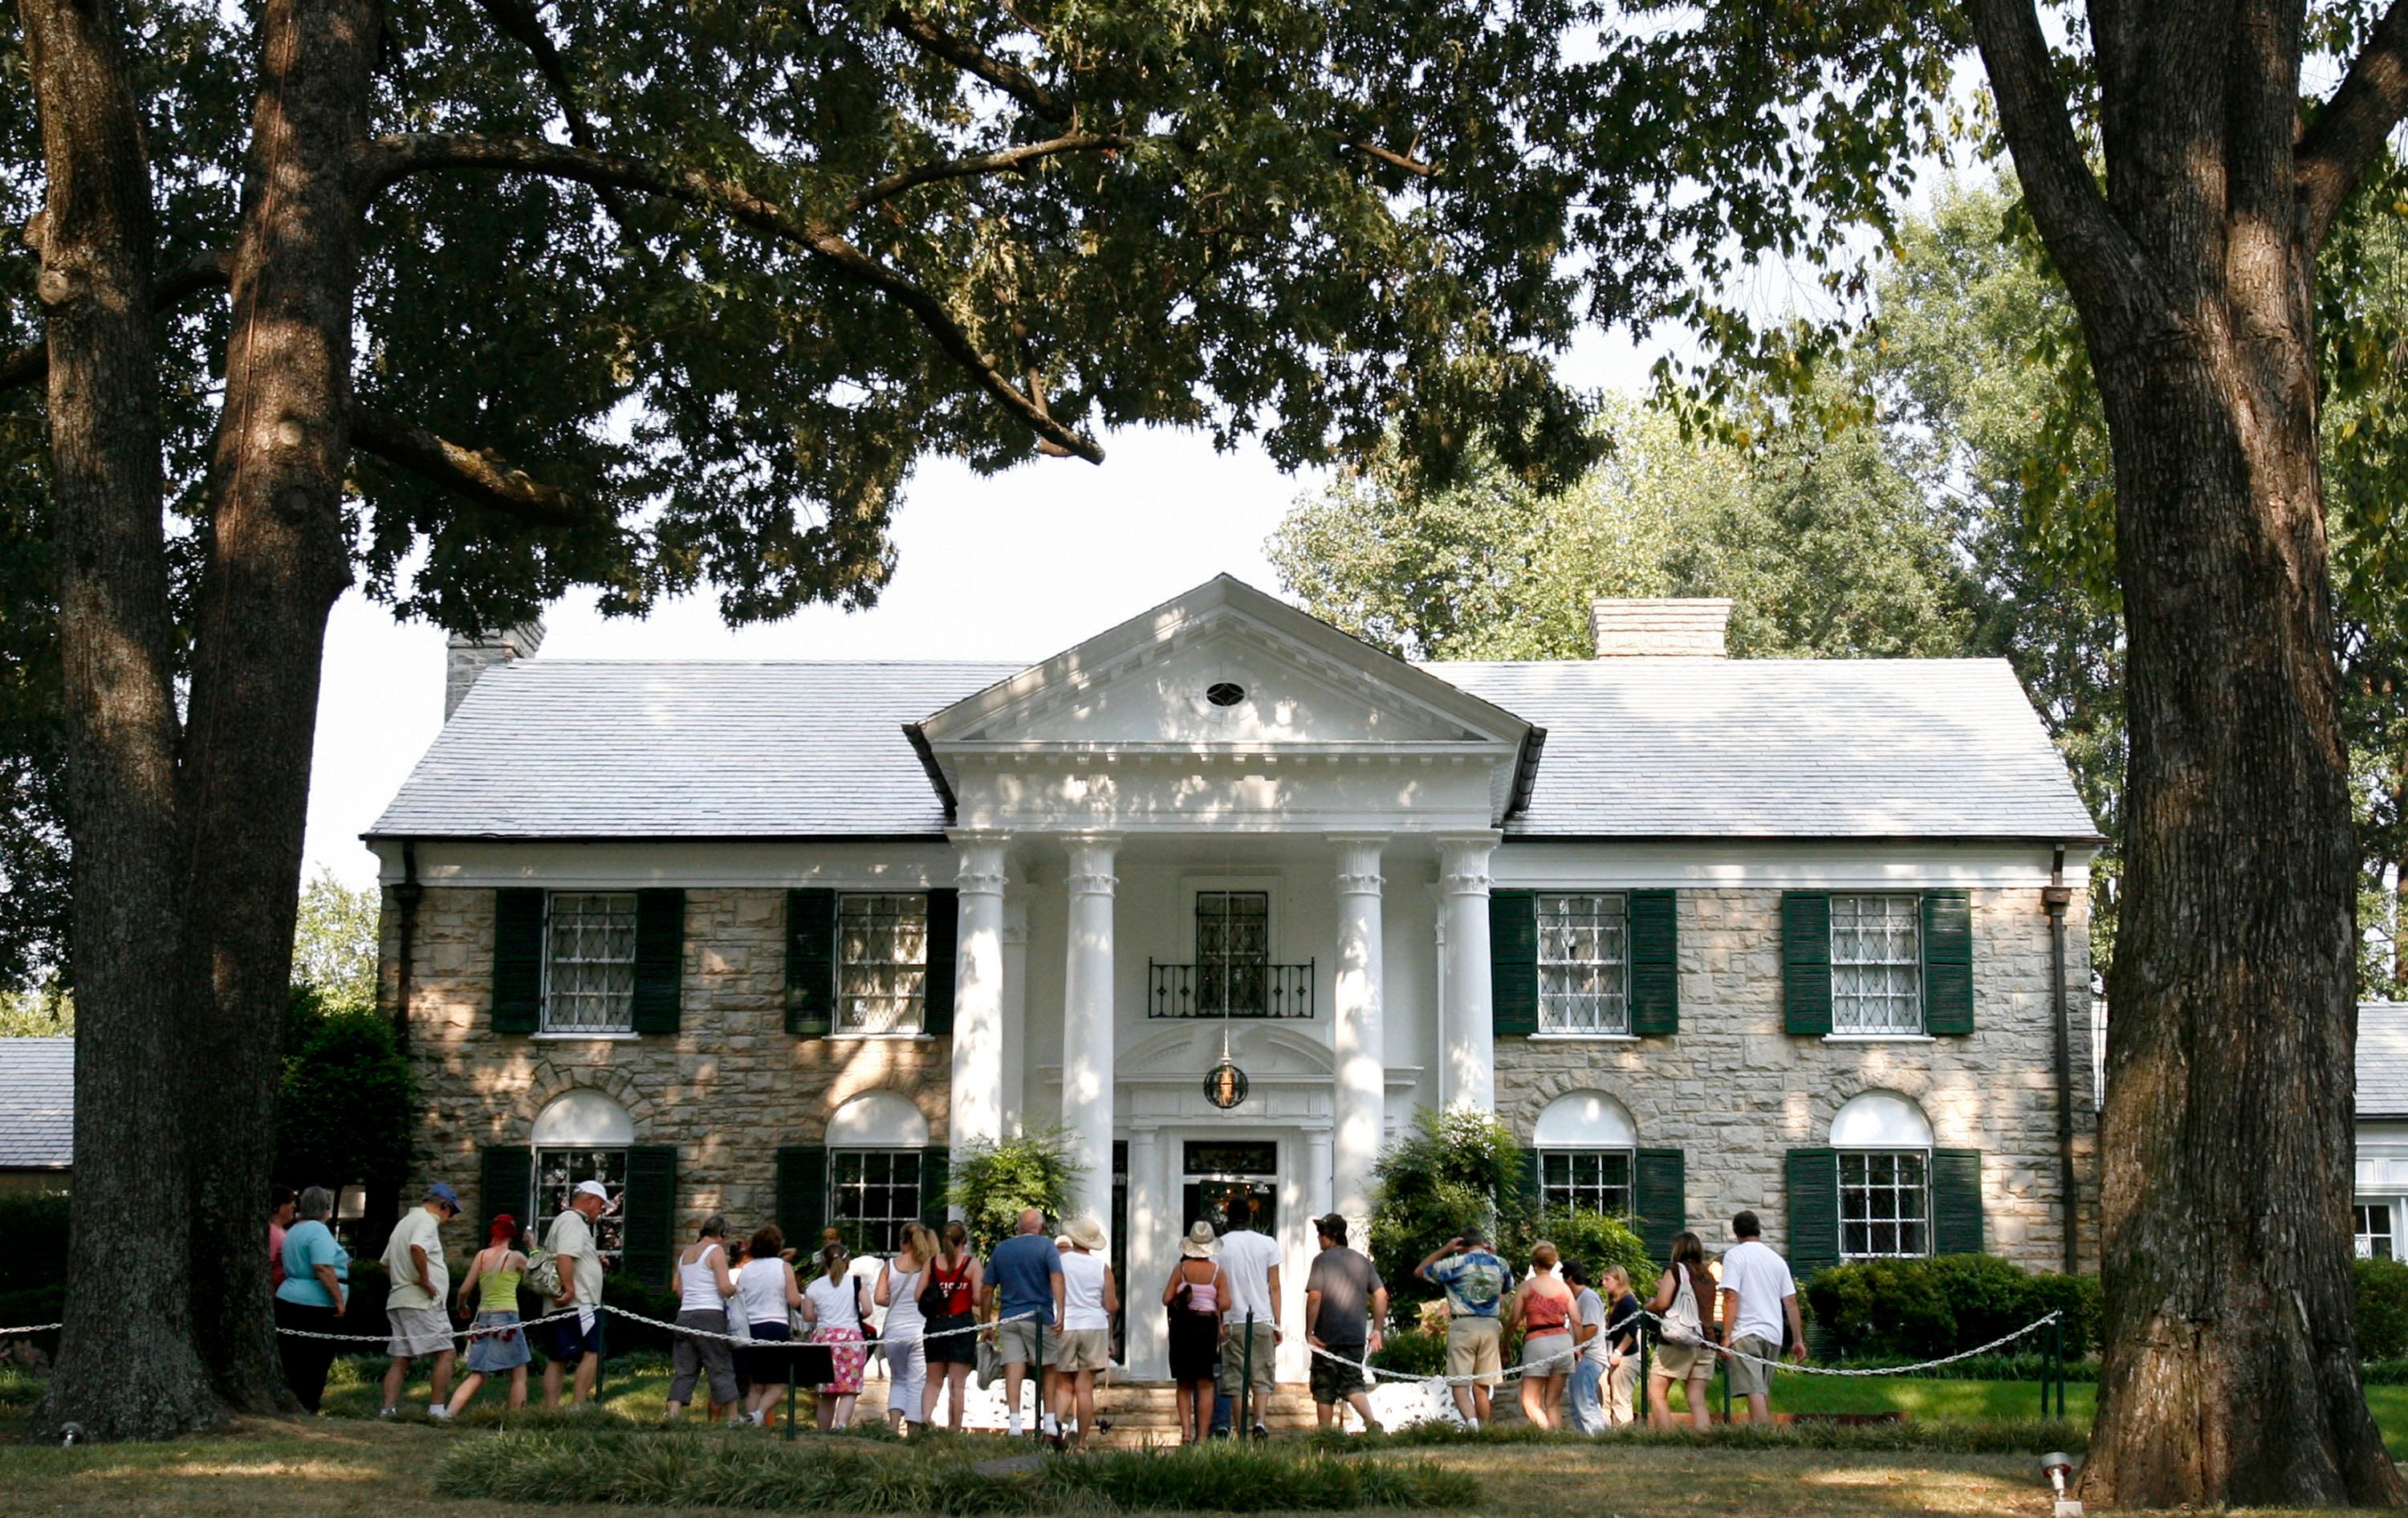 It looks like Graceland won't be auctioned off. But how did the possibility ever occur?